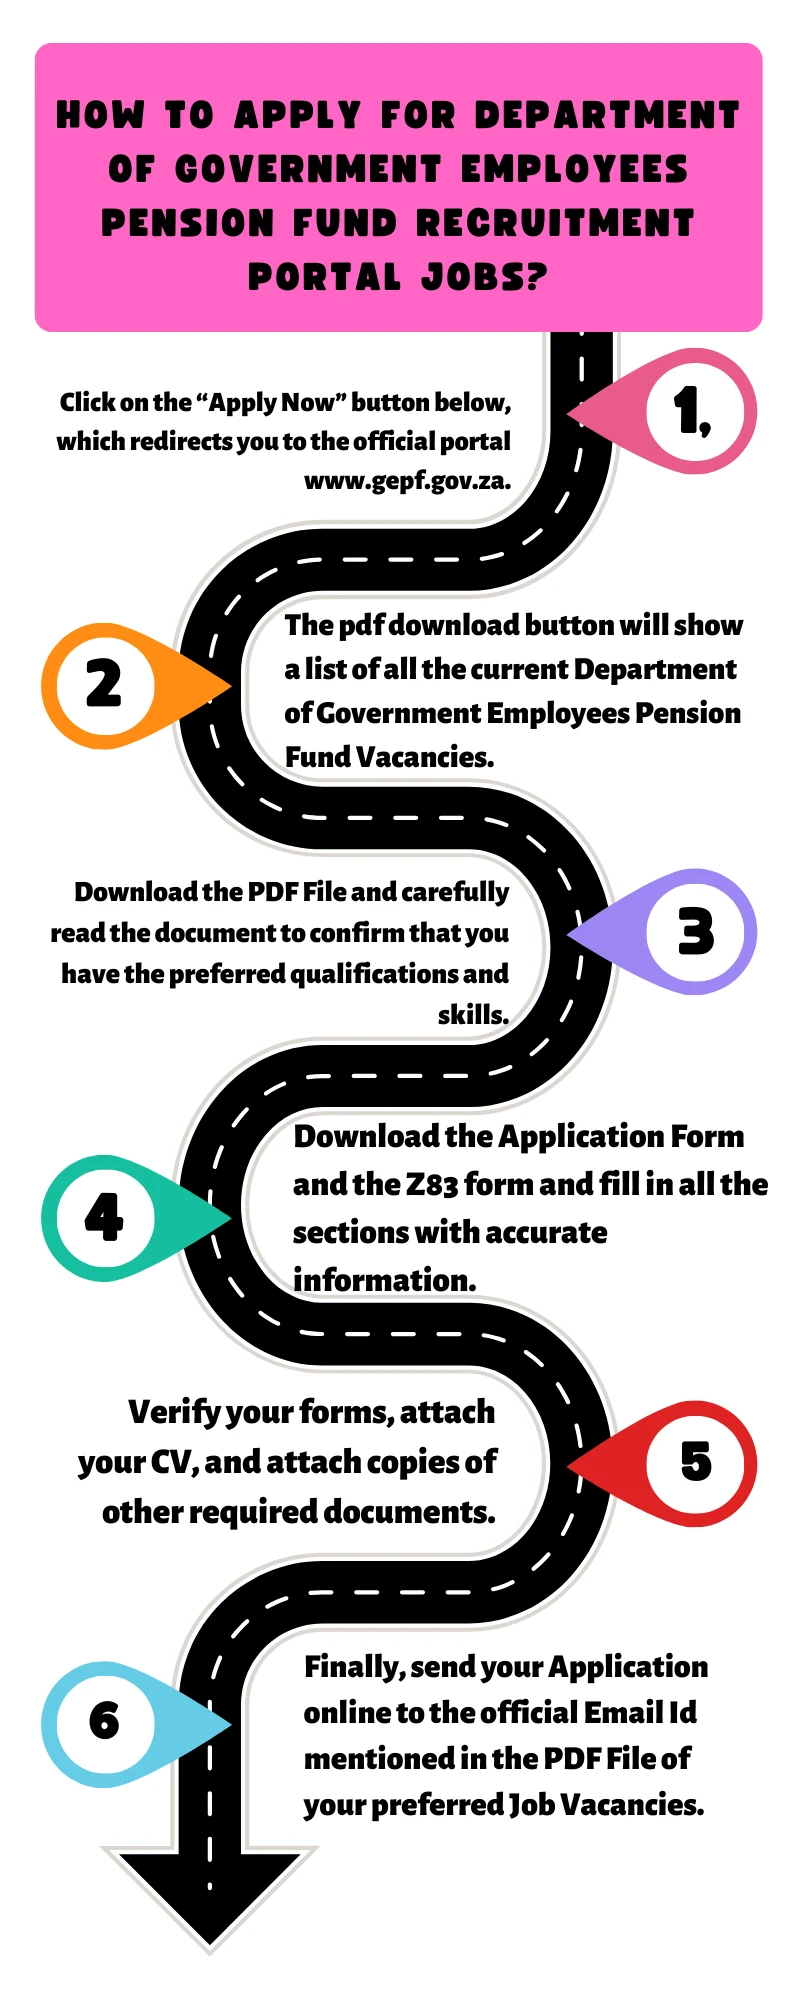 How To Apply for Department of Government Employees Pension Fund Recruitment Portal Jobs?